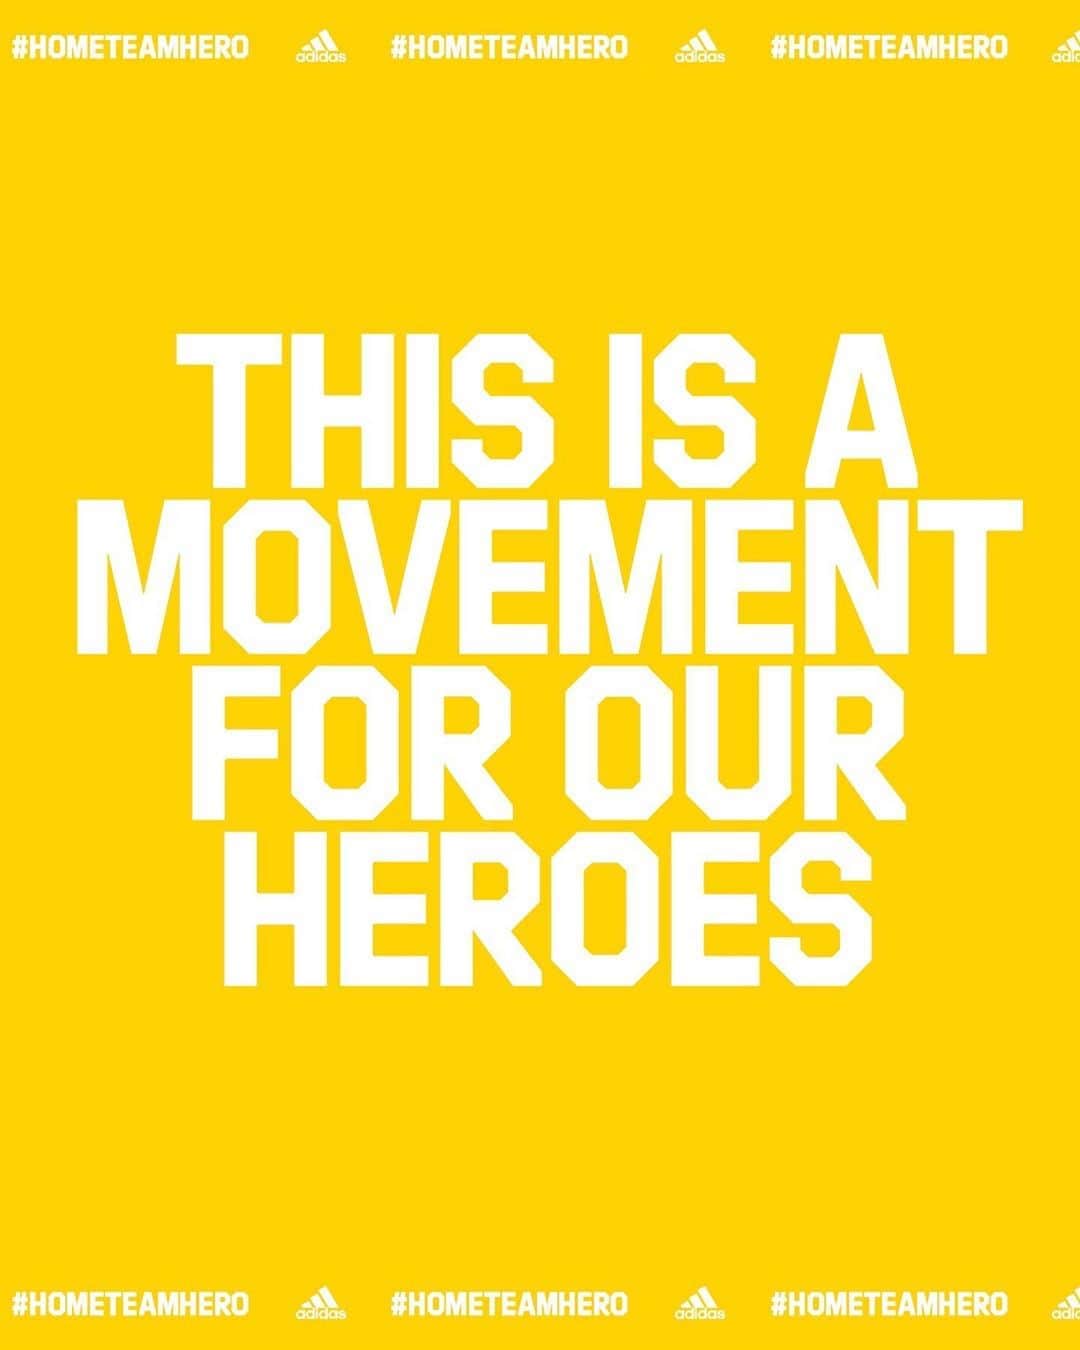 adidasのインスタグラム：「Join the #HOMETEAMHERO Challenge, the ultimate donation rally to give back to our frontline heroes who never stopped moving for us. ⁣⁣⁣ ⁣ ⁣⁣⁣ Every active minute counts in the adidas Running and Training apps (@adidasruntastic) and select partner apps. We will donate $1 for every one hour collectively logged to the #COVID19Fund for @WHO, up to one million hours.⁣⁣ ⁣⁣⁣ ⁣⁣ That’s one million hours together. One million hours dedicated to those who are working to keep us safe.⁣⁣⁣ ⁣⁣⁣⁣ 🗓 Starts May 29 ⁣⁣⁣ Learn more now at adidas.com/HOMETEAMHERO⁣⁣ ⁣⁣⁣ ⁣ @UNFoundation」